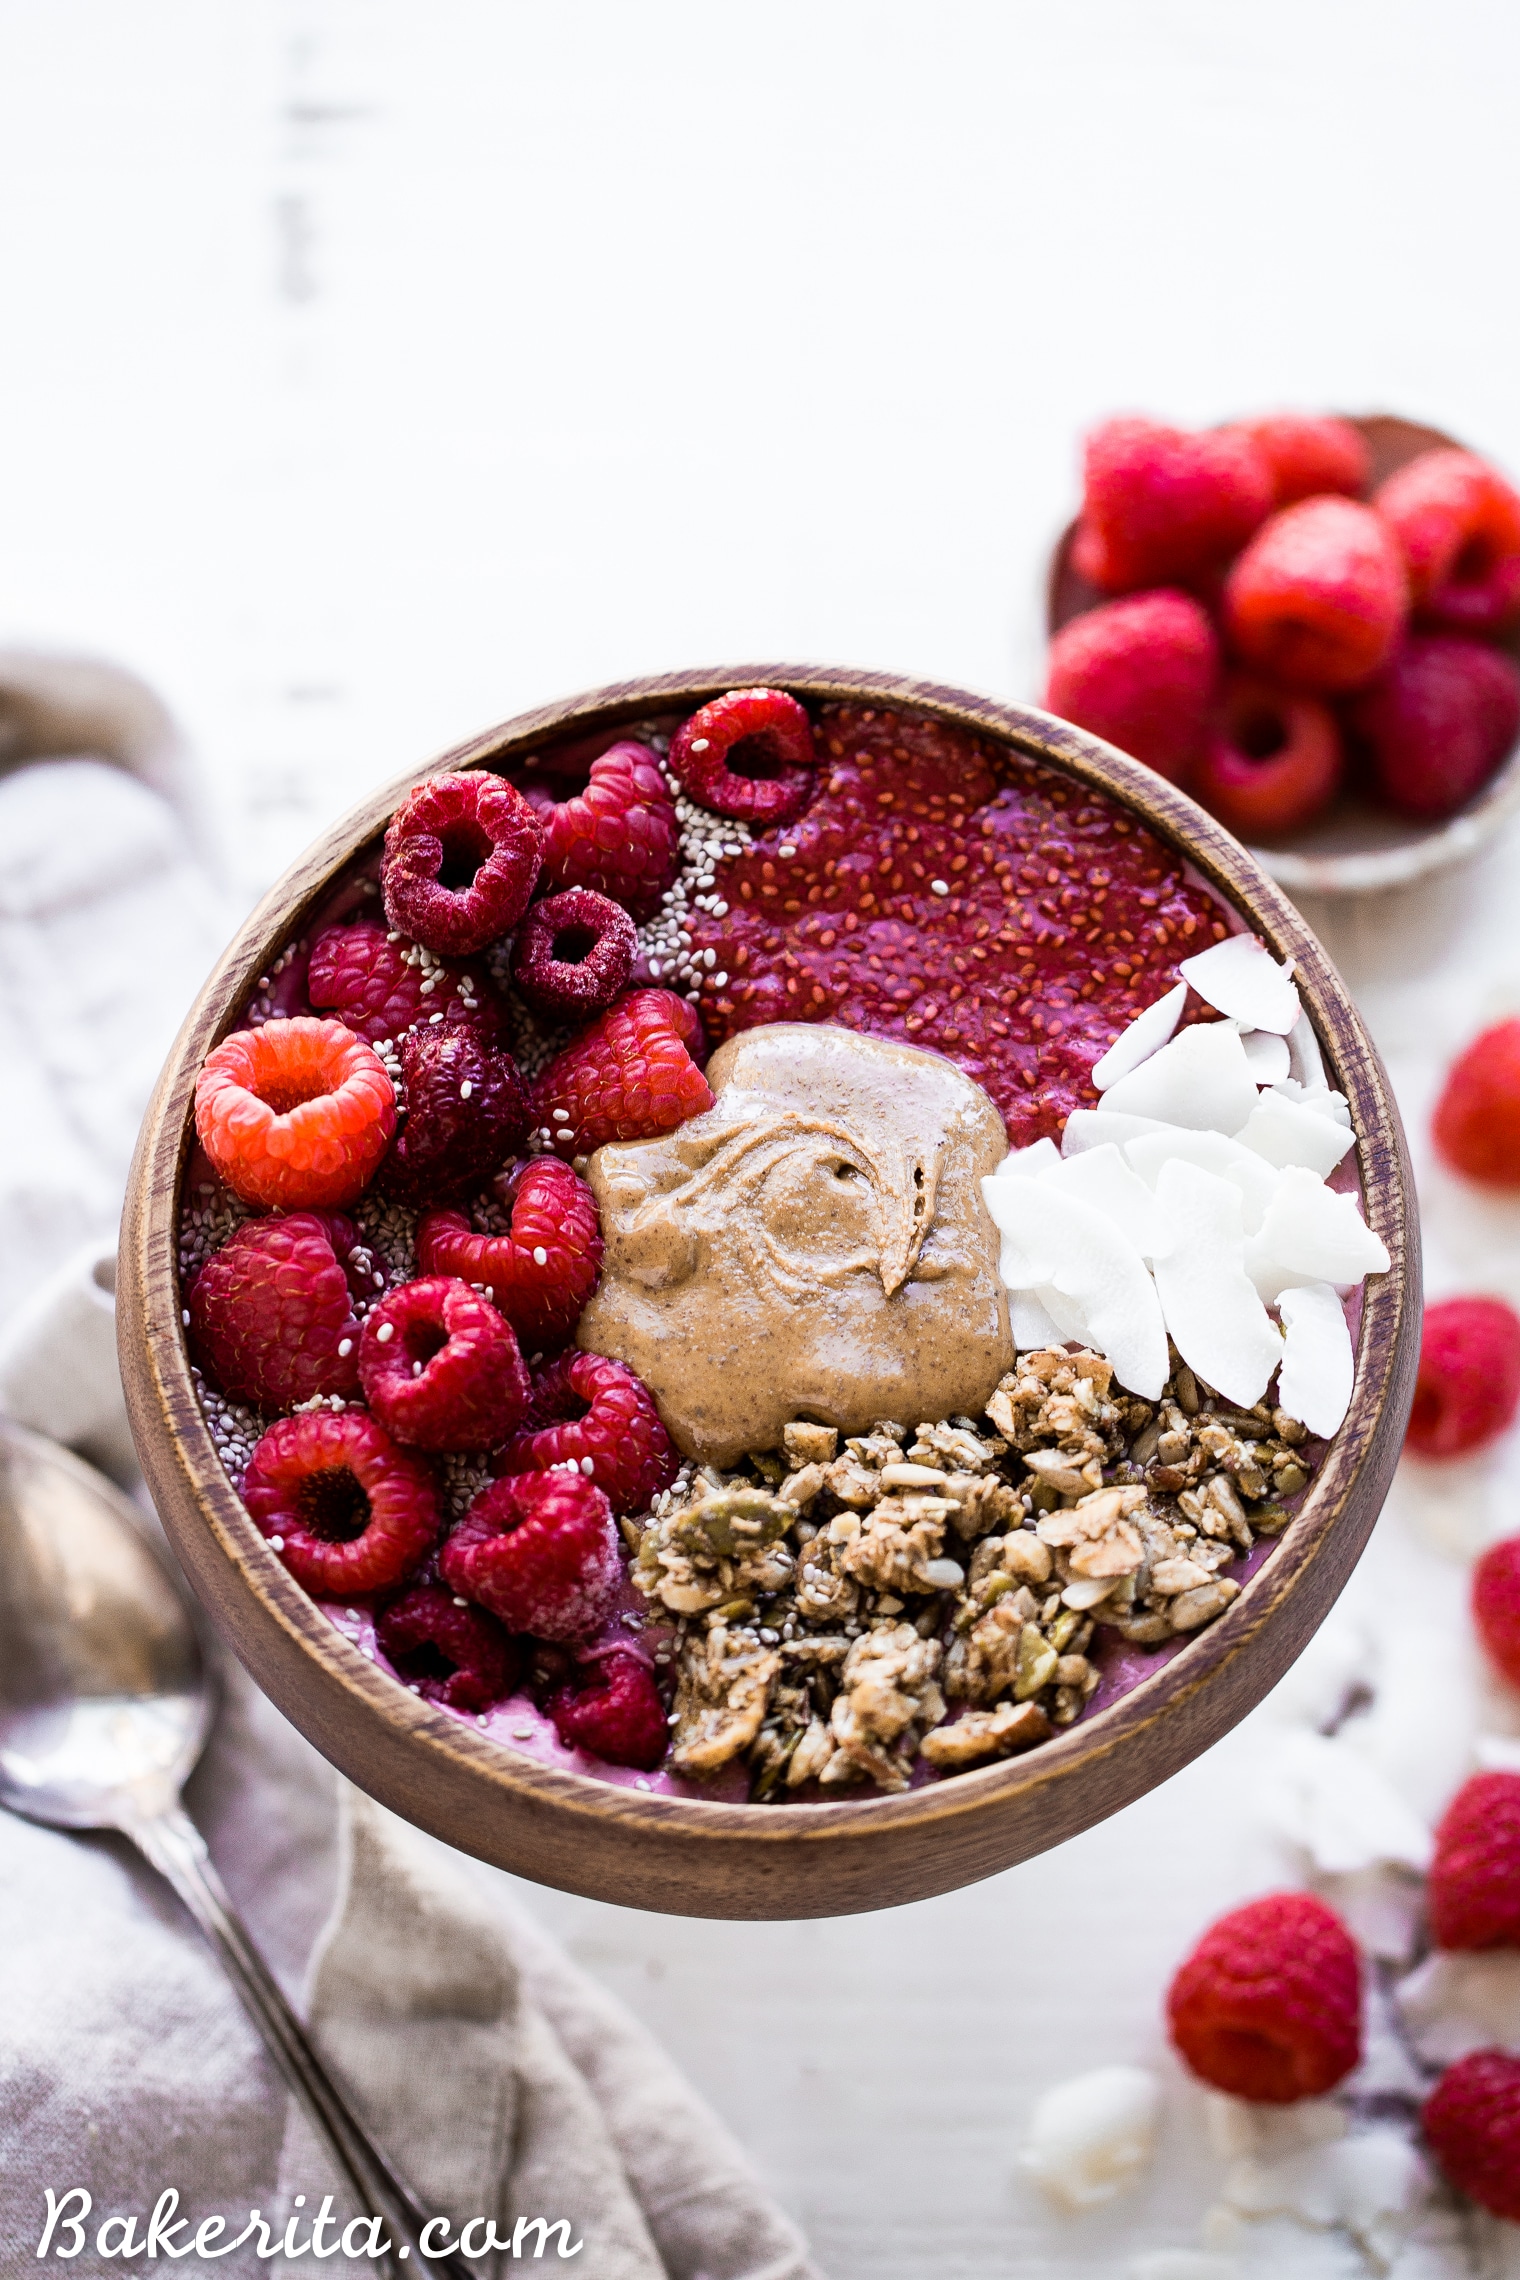 This Raspberry Almond Butter Smoothie Bowl is a creamy, sweet breakfast treat that can be made in just a few minutes and is begging to be loaded up with all of your favorite toppings! You'd never guess there was a hidden veggie in there, too.